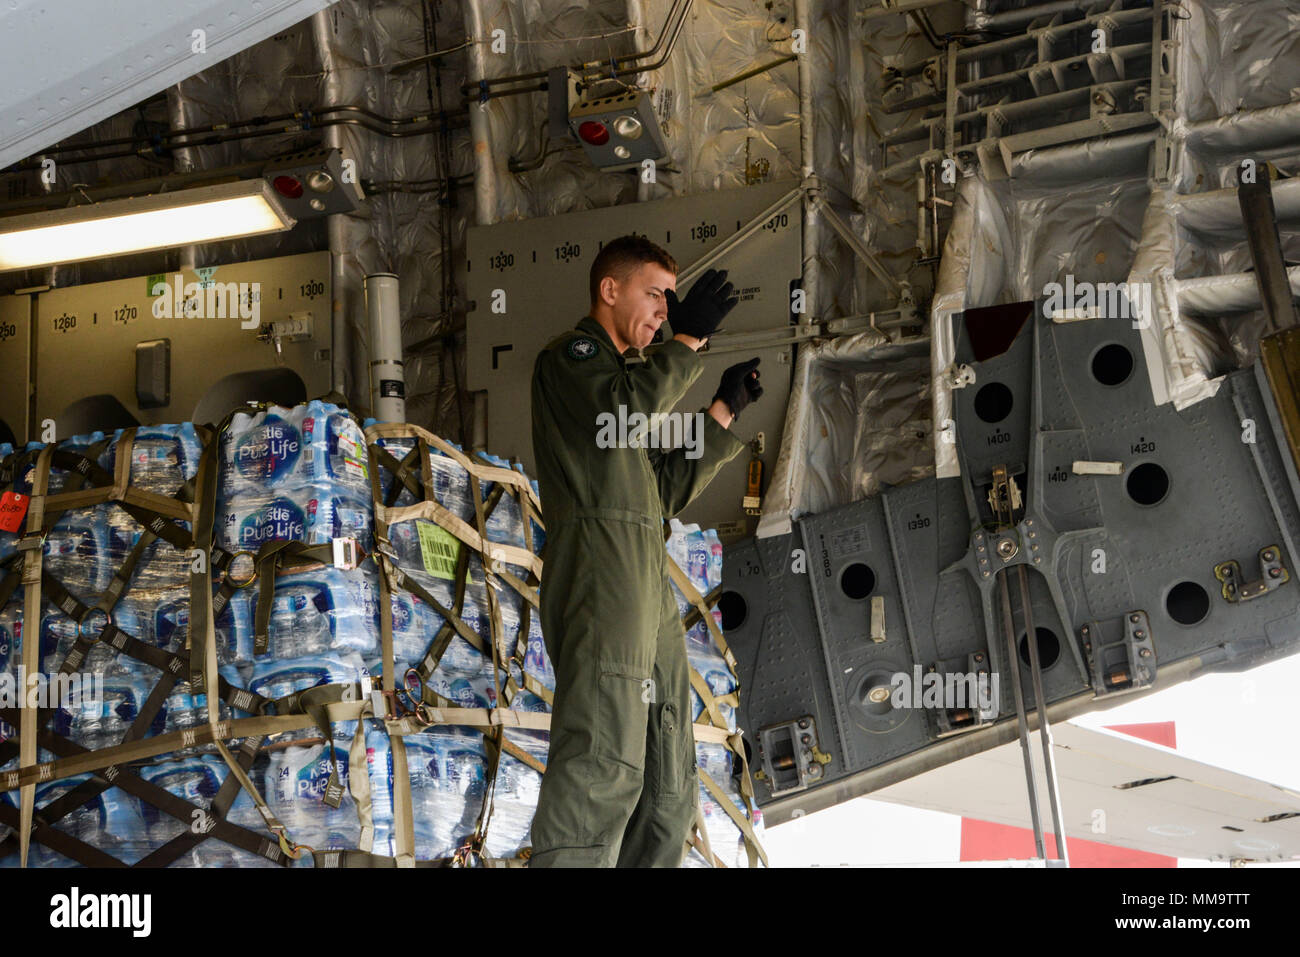 Senior Airman Dakota Maynor, 21st Airlift Squadron loadmaster, guides a forklift to the ramp of a C-17 Globemaster III to download cargo Sept. 23 at Benito Juárez International Airport, Mexico City, Mexico. At the request of the Mexican government, the C-17 and its six-member crew from Travis Air Force Base, Calif., assisted U.S. efforts to provide aid to Mexico by airlifting over 130,000 pounds of food, water, hygiene and medical supplies to Mexico City and Oaxaca after a 7.1-magnitude earthquake struck the area Sept. 19. (U.S. Air Force photo / 2nd Lt. Sarah Johnson) Stock Photo